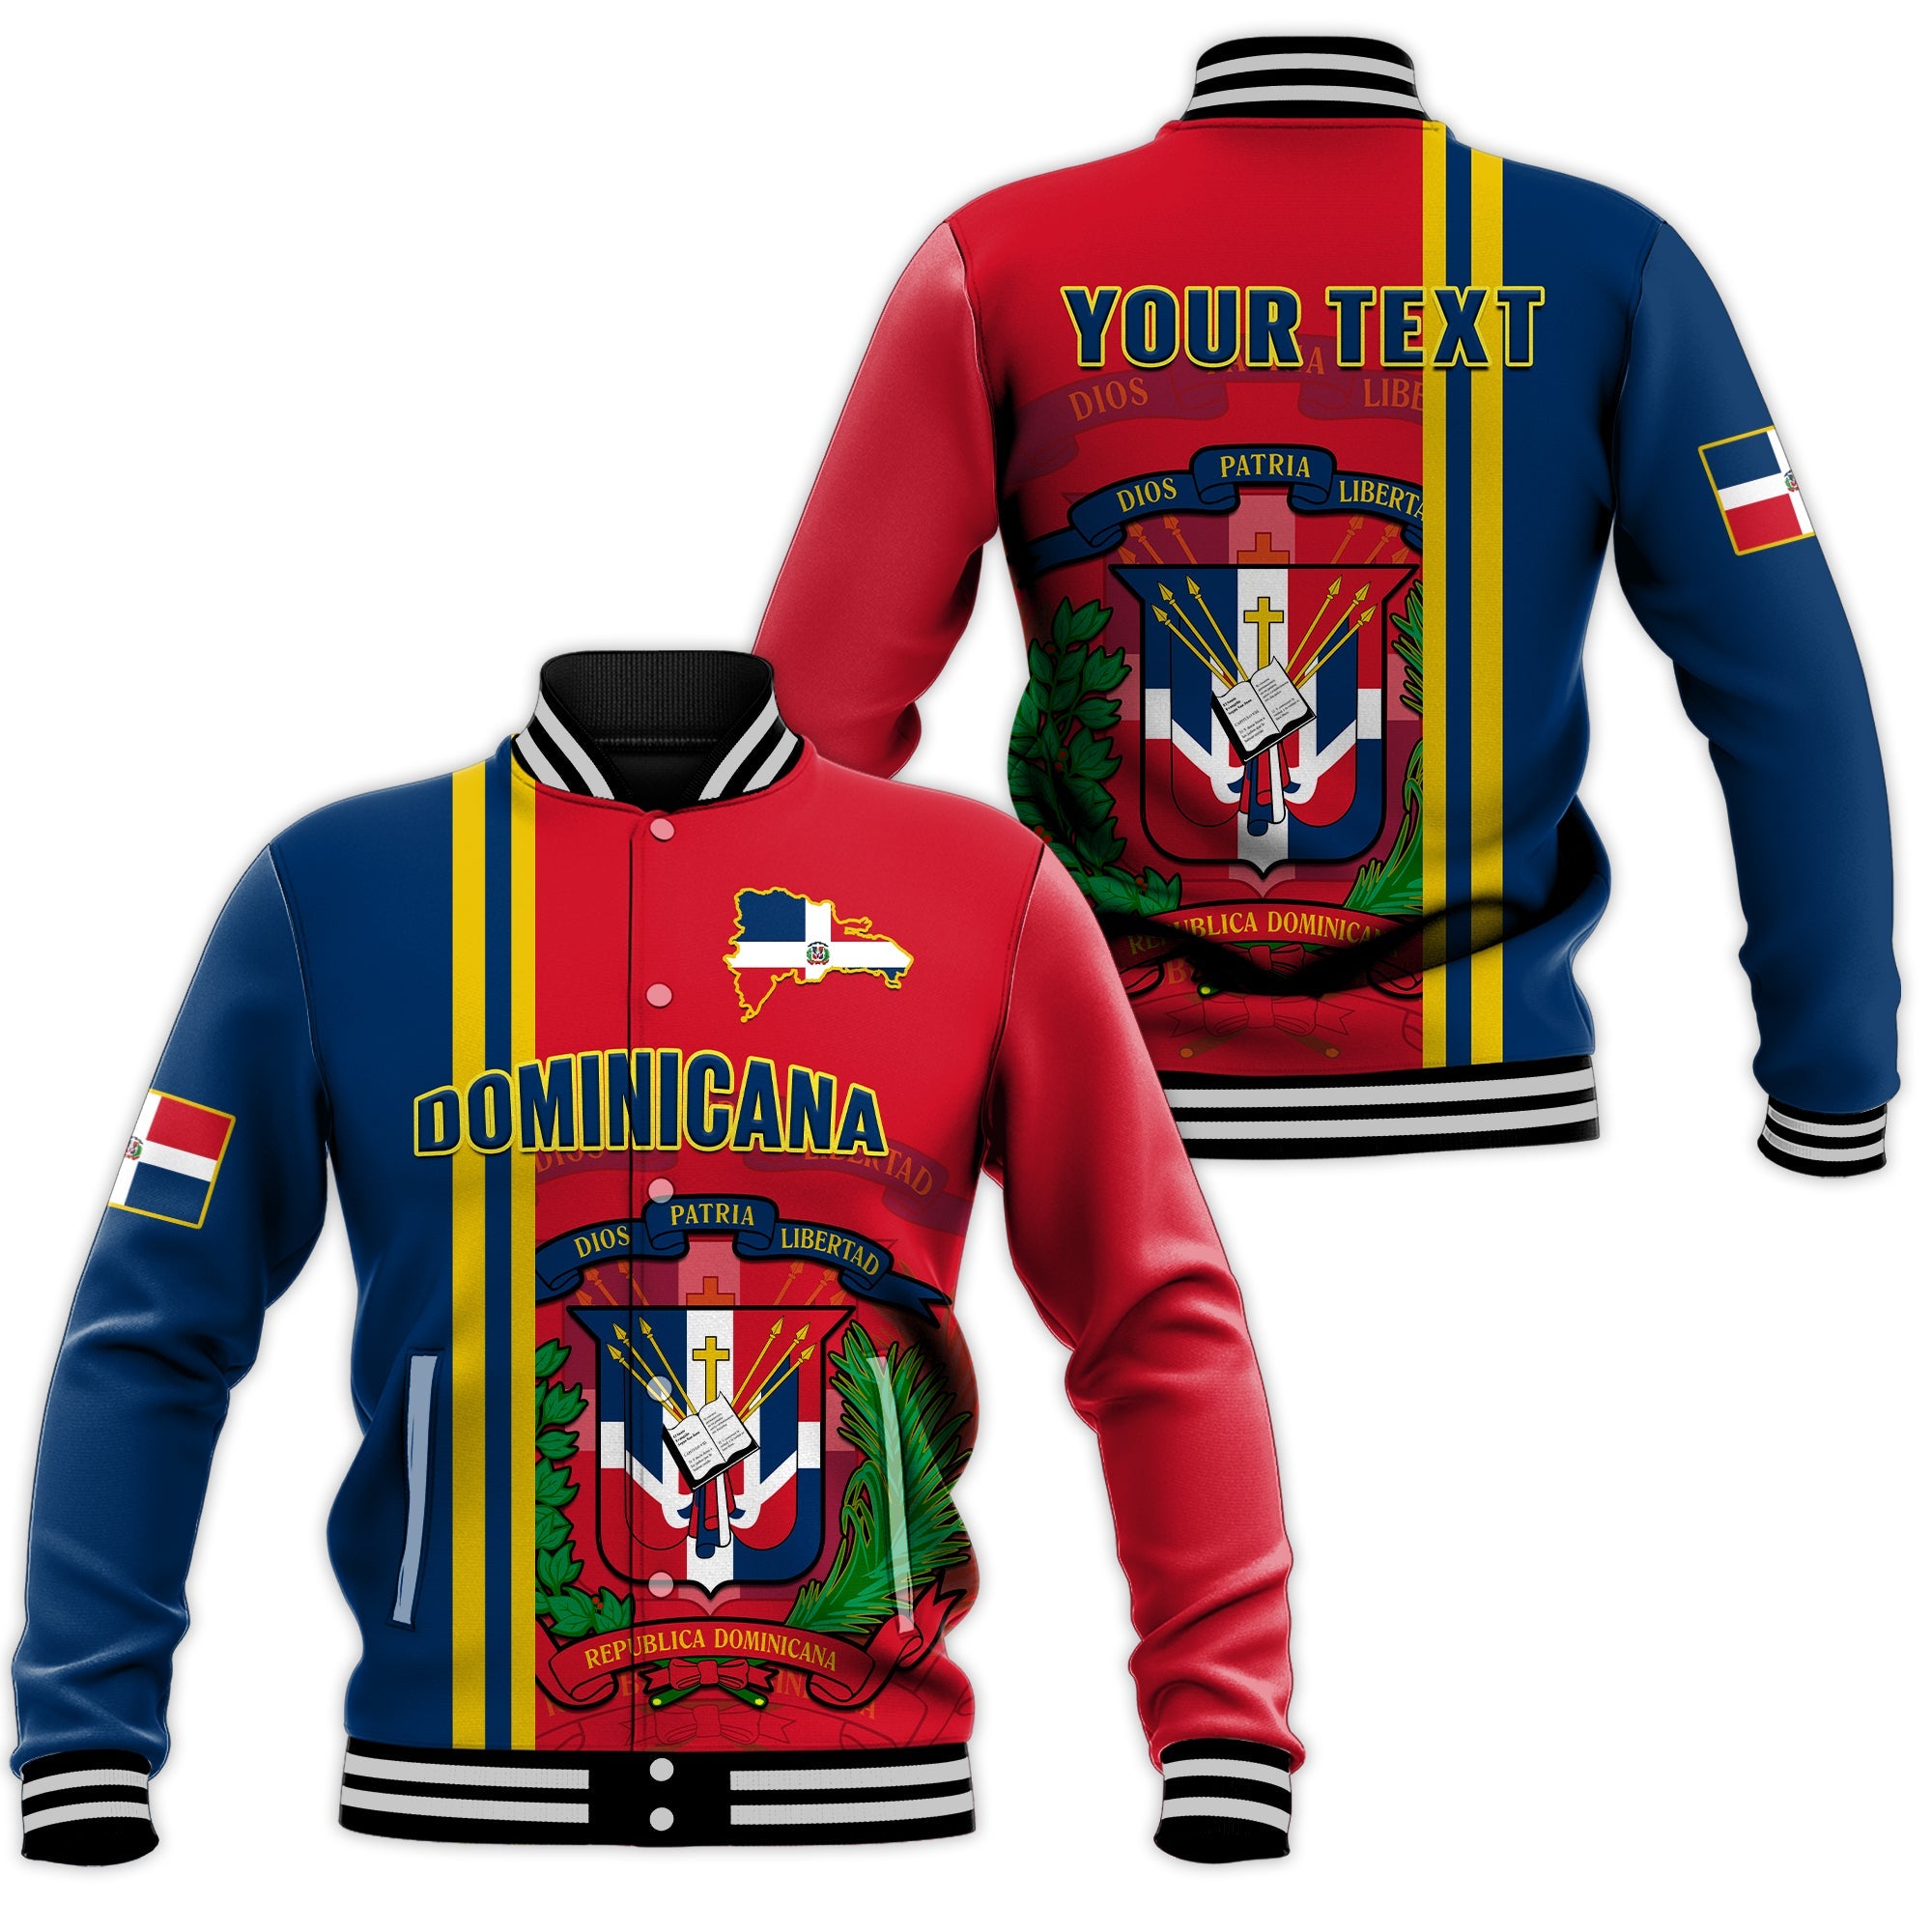 custom-personalised-dominican-republic-baseball-jacket-happy-179-years-of-independence